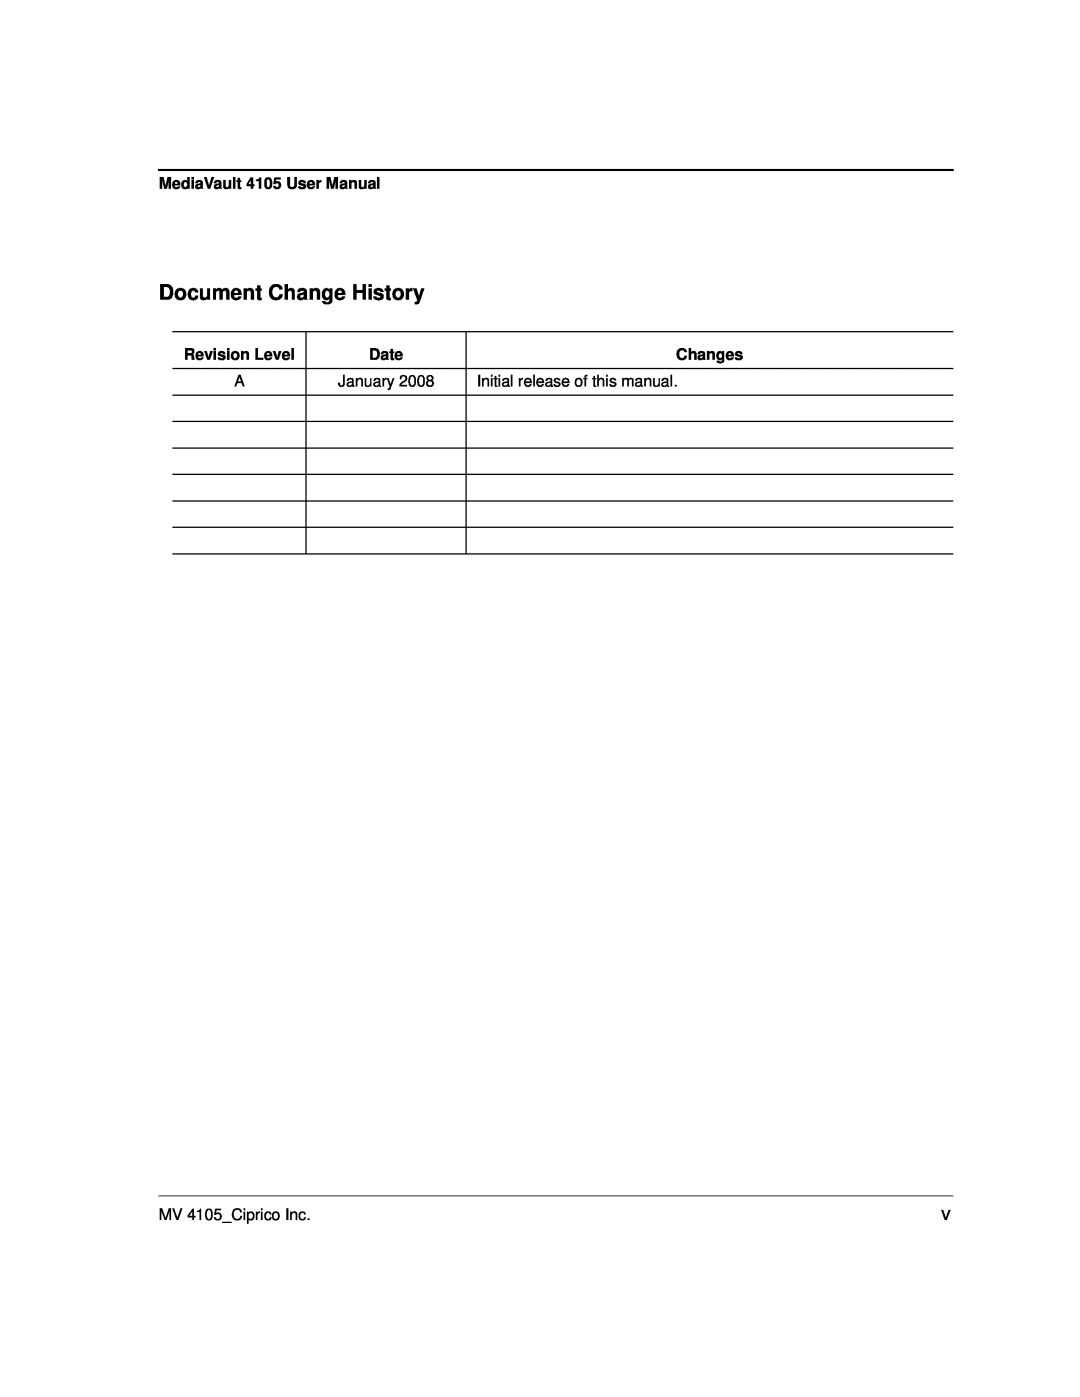 Ciprico 4105 Series user manual Document Change History, January 